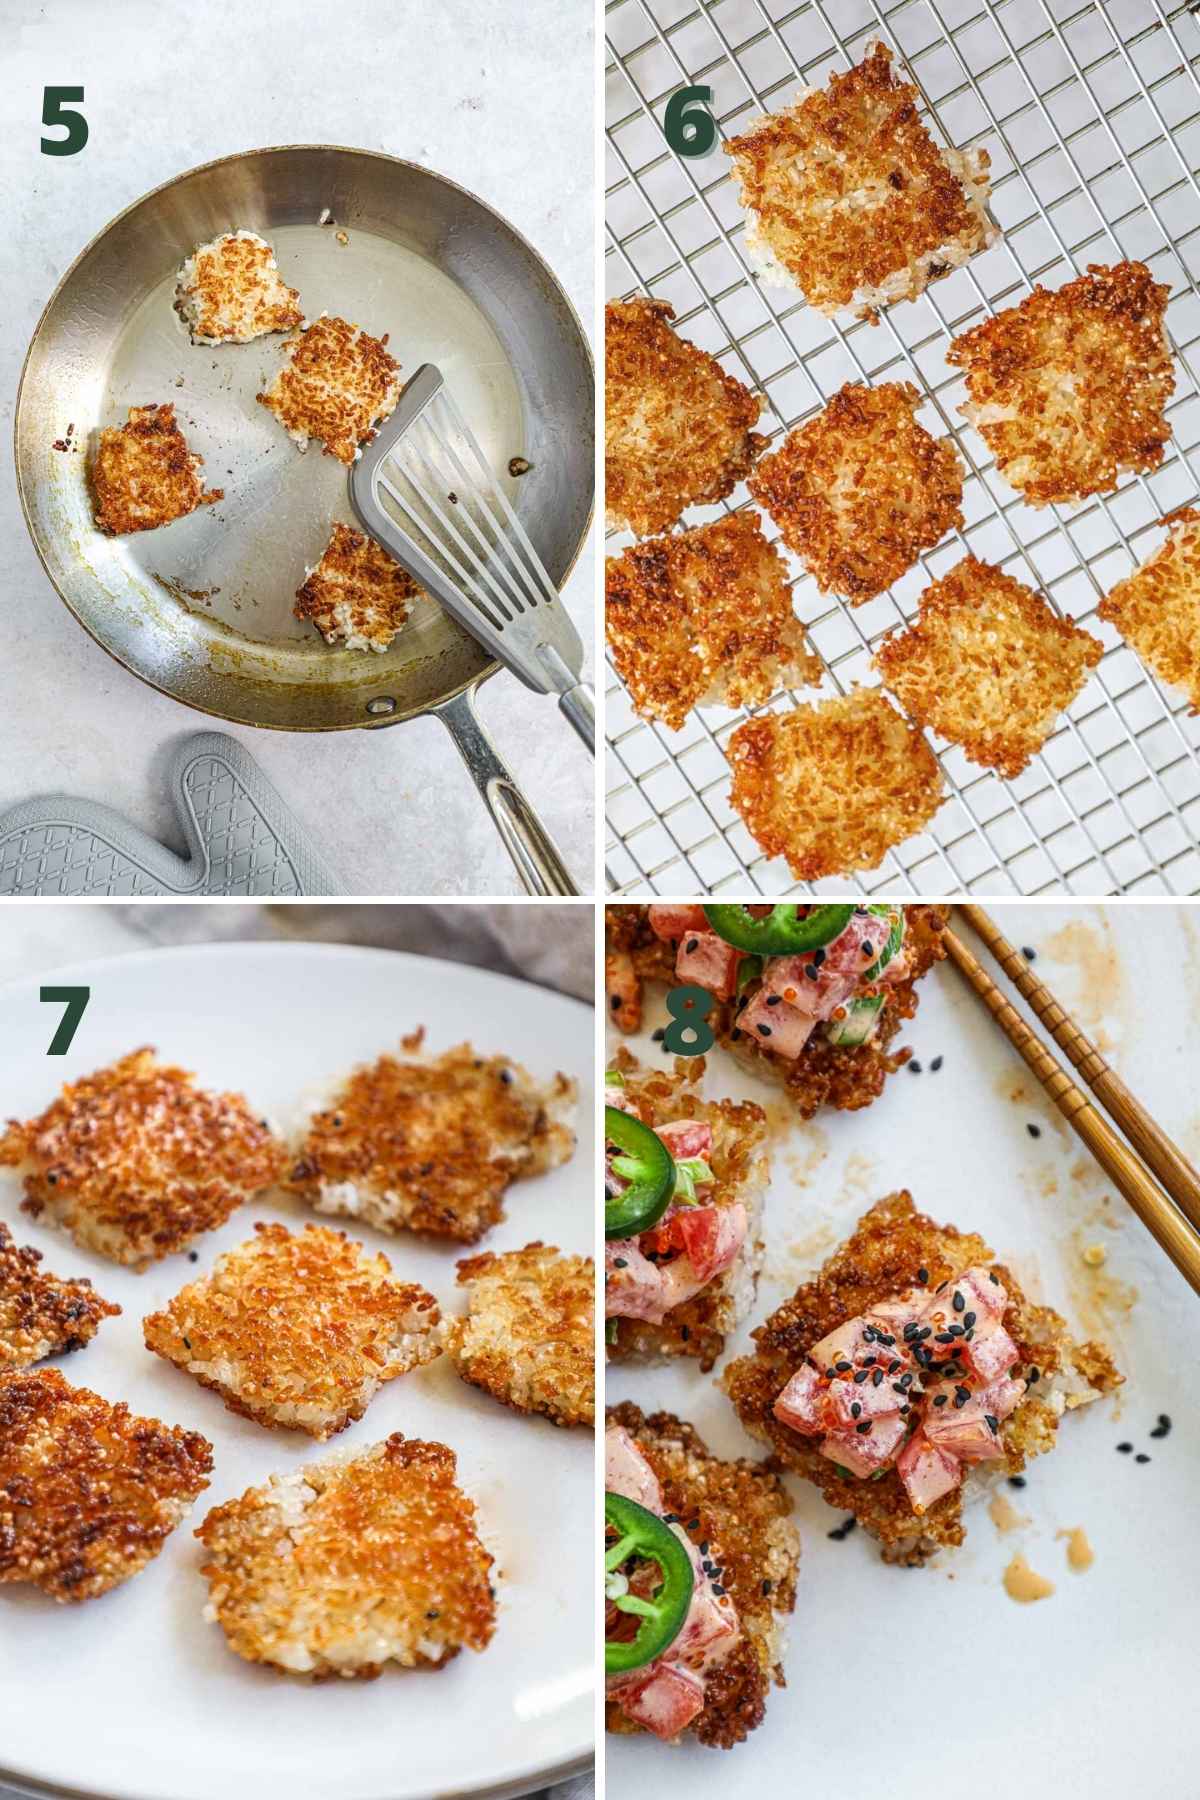 Steps to make crispy rice squares, including frying the rice squares on both sides, draining on a wire rack, plating on a serving plate, and topping with poke or salad.